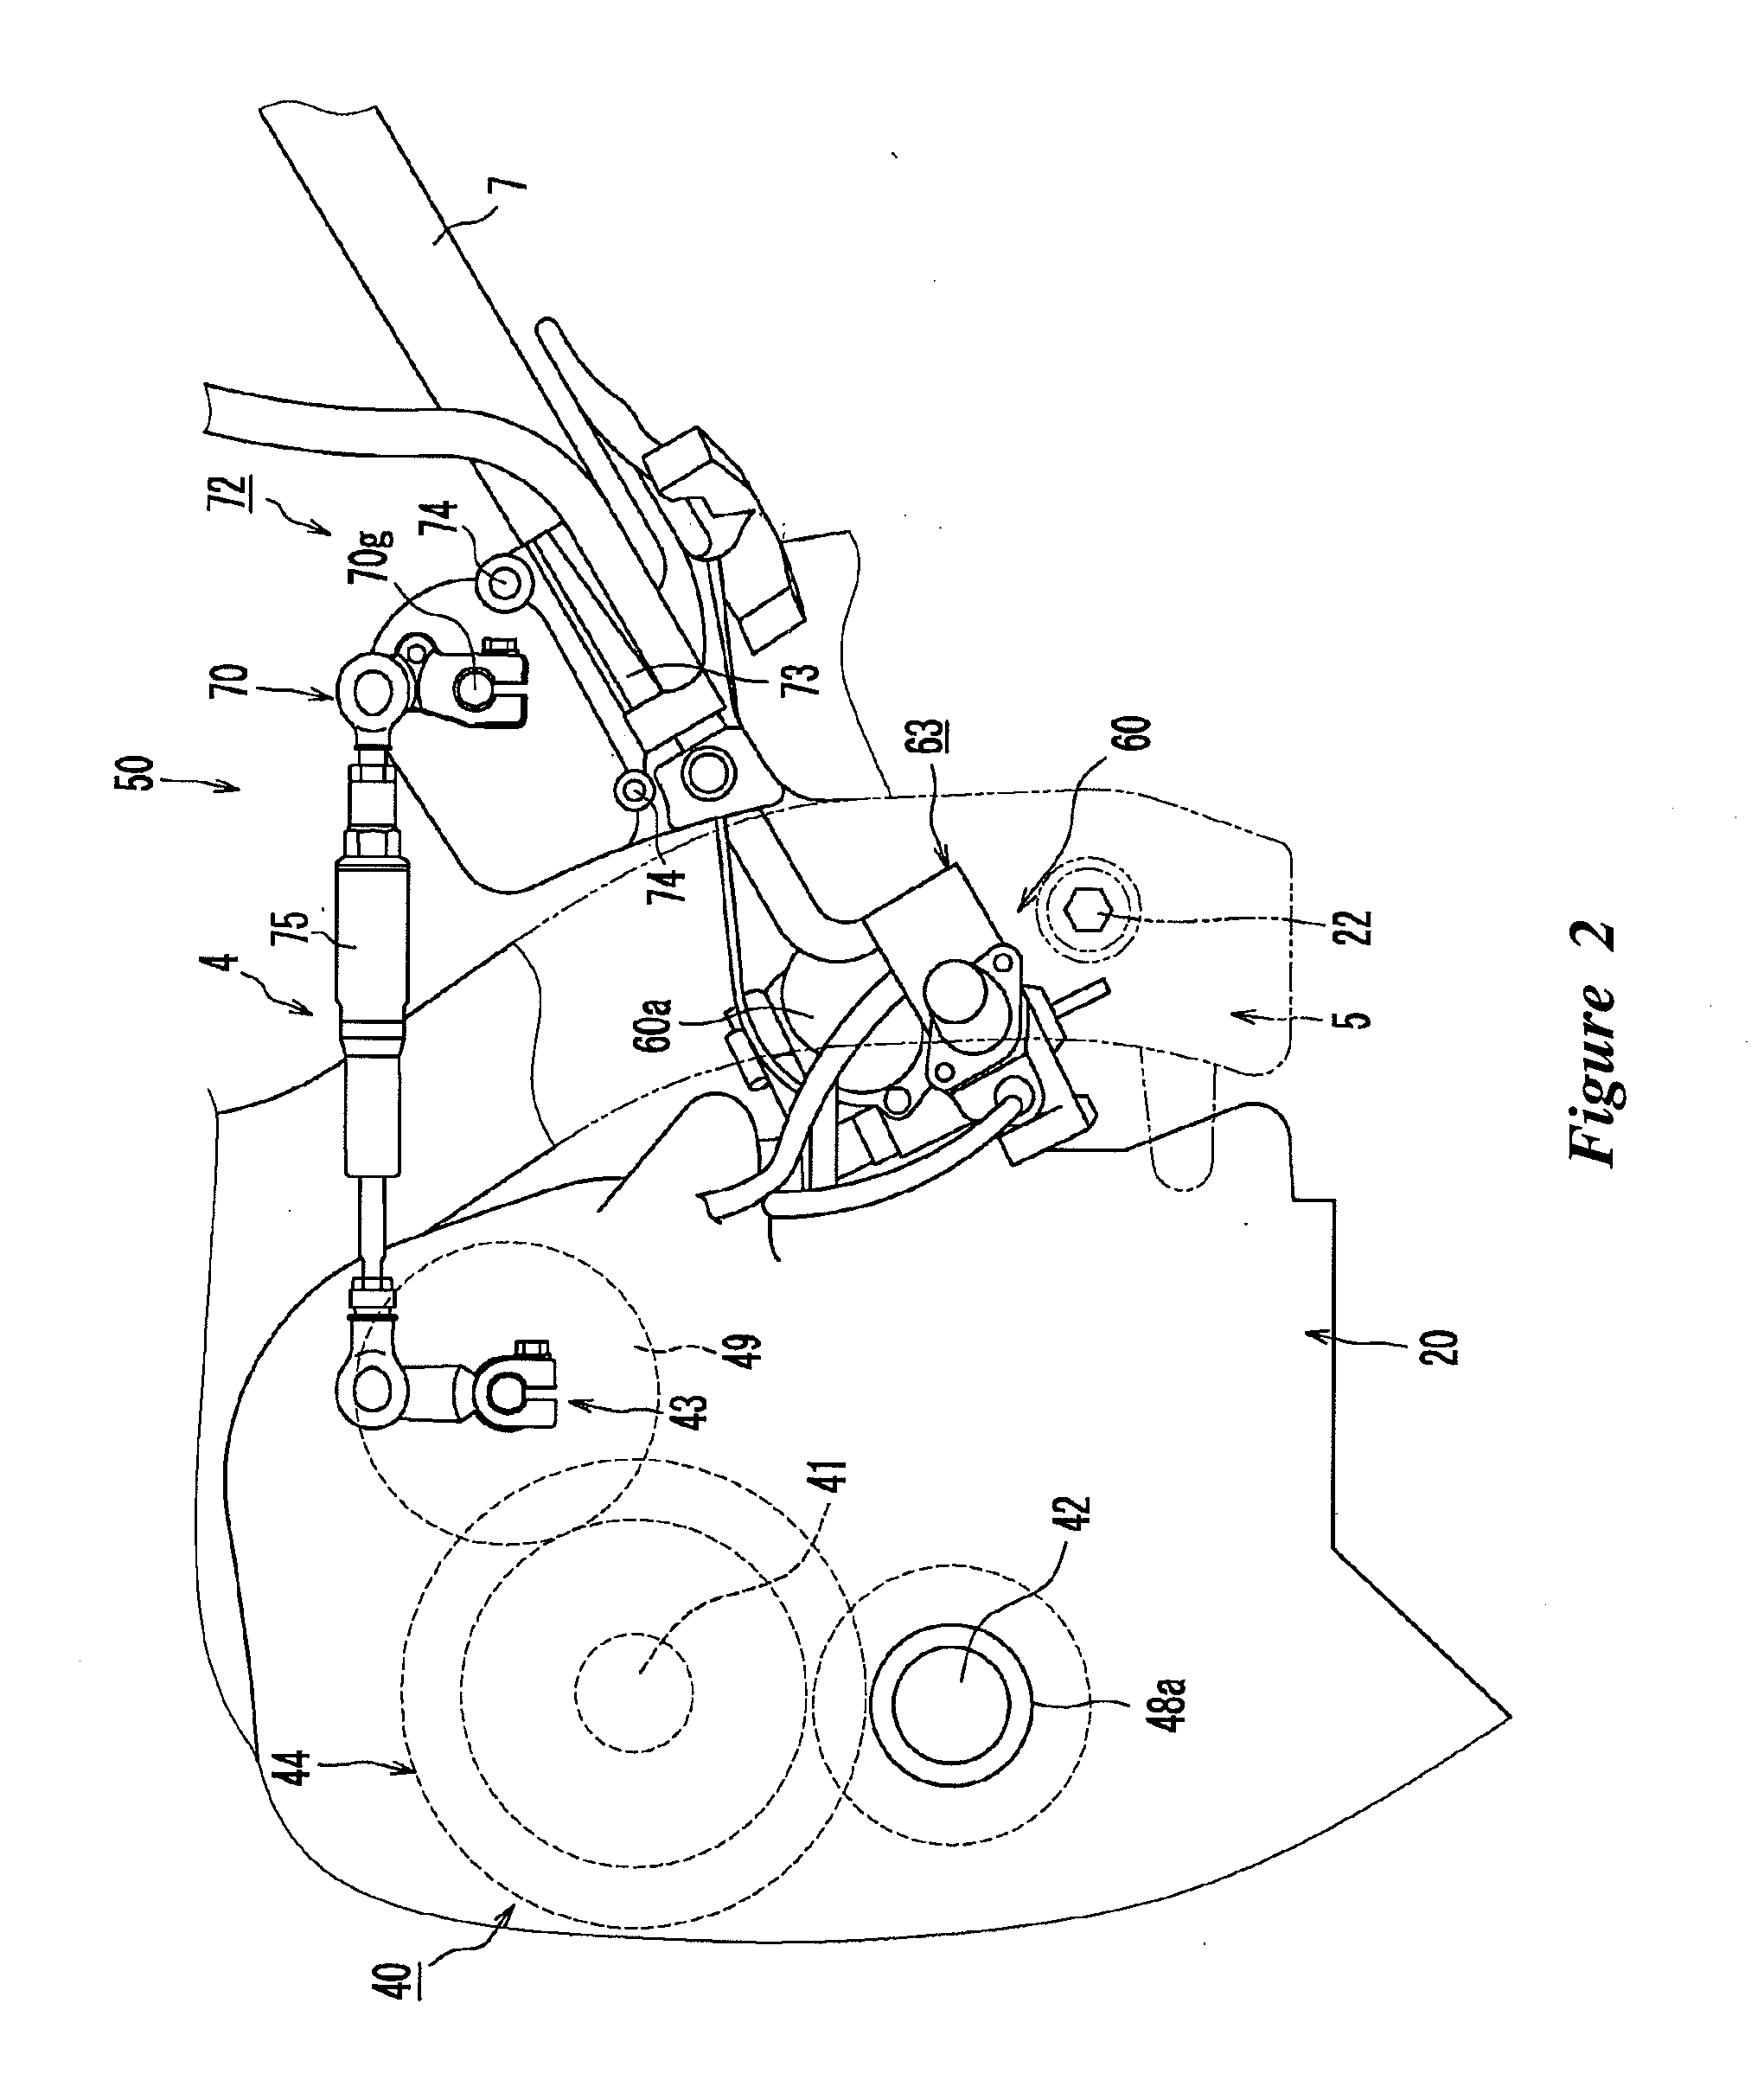 Shift actuator, vehicle, and method of integrating vehicle